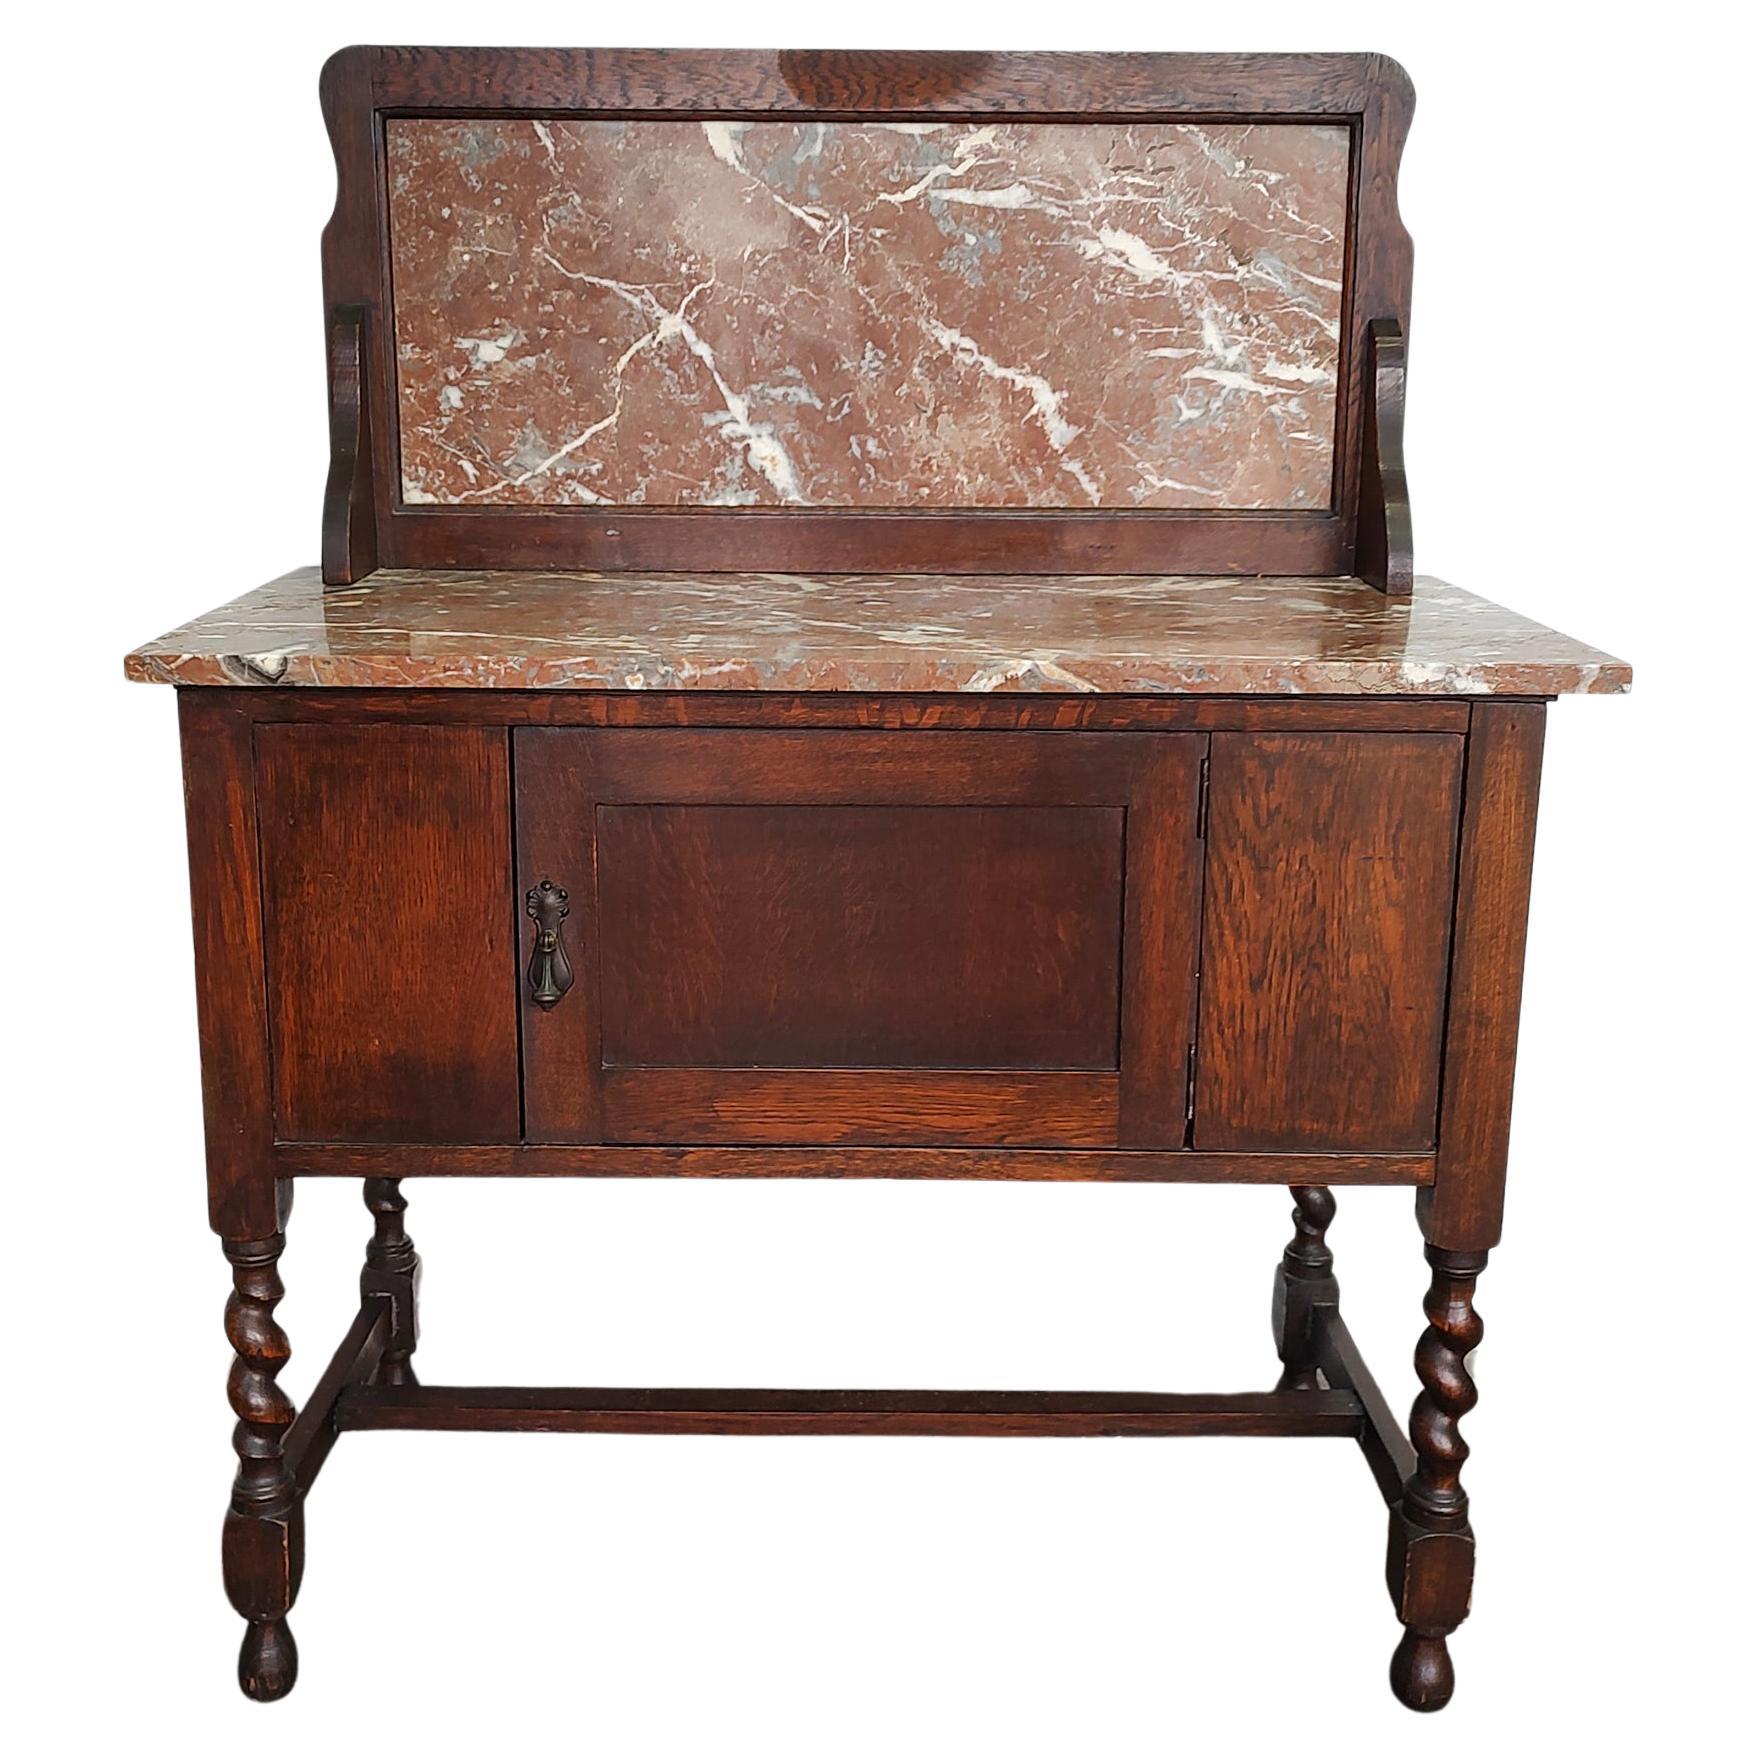 Early 20th-Century Antique Oak and Pink Stone Wash Stand Cabinet